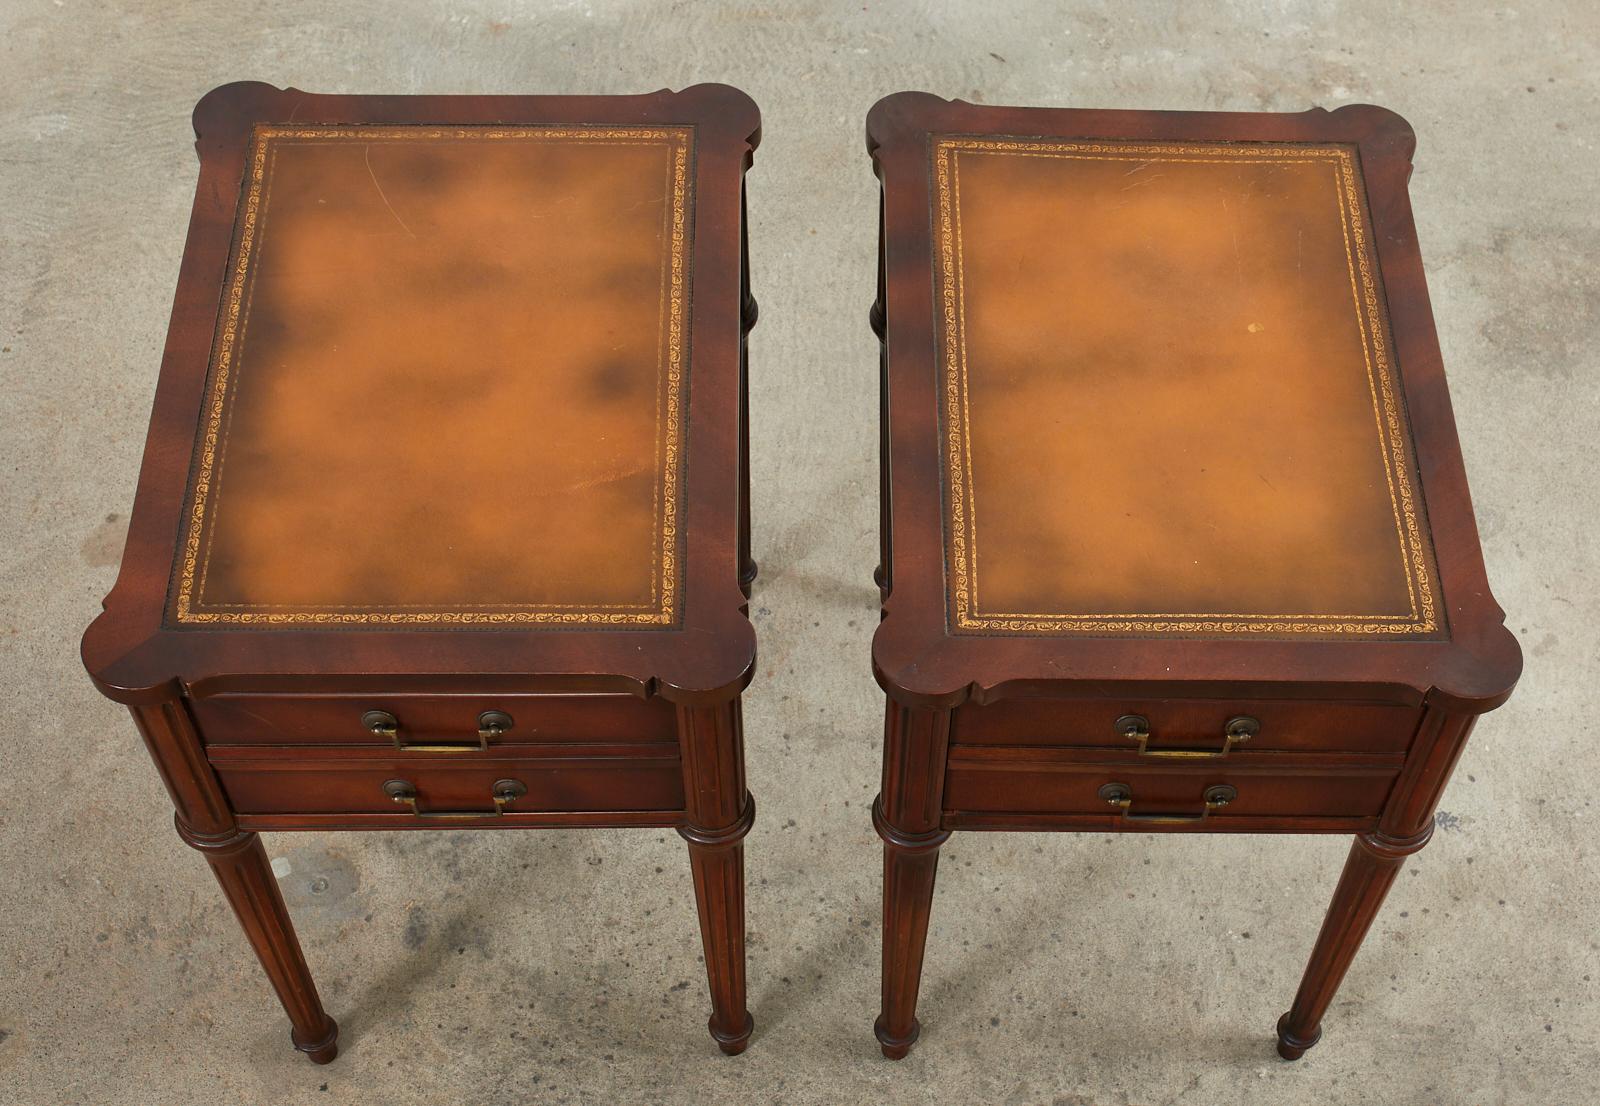 Embossed Pair of Louis XVI Style Mahogany Nightstands with Leather Tops